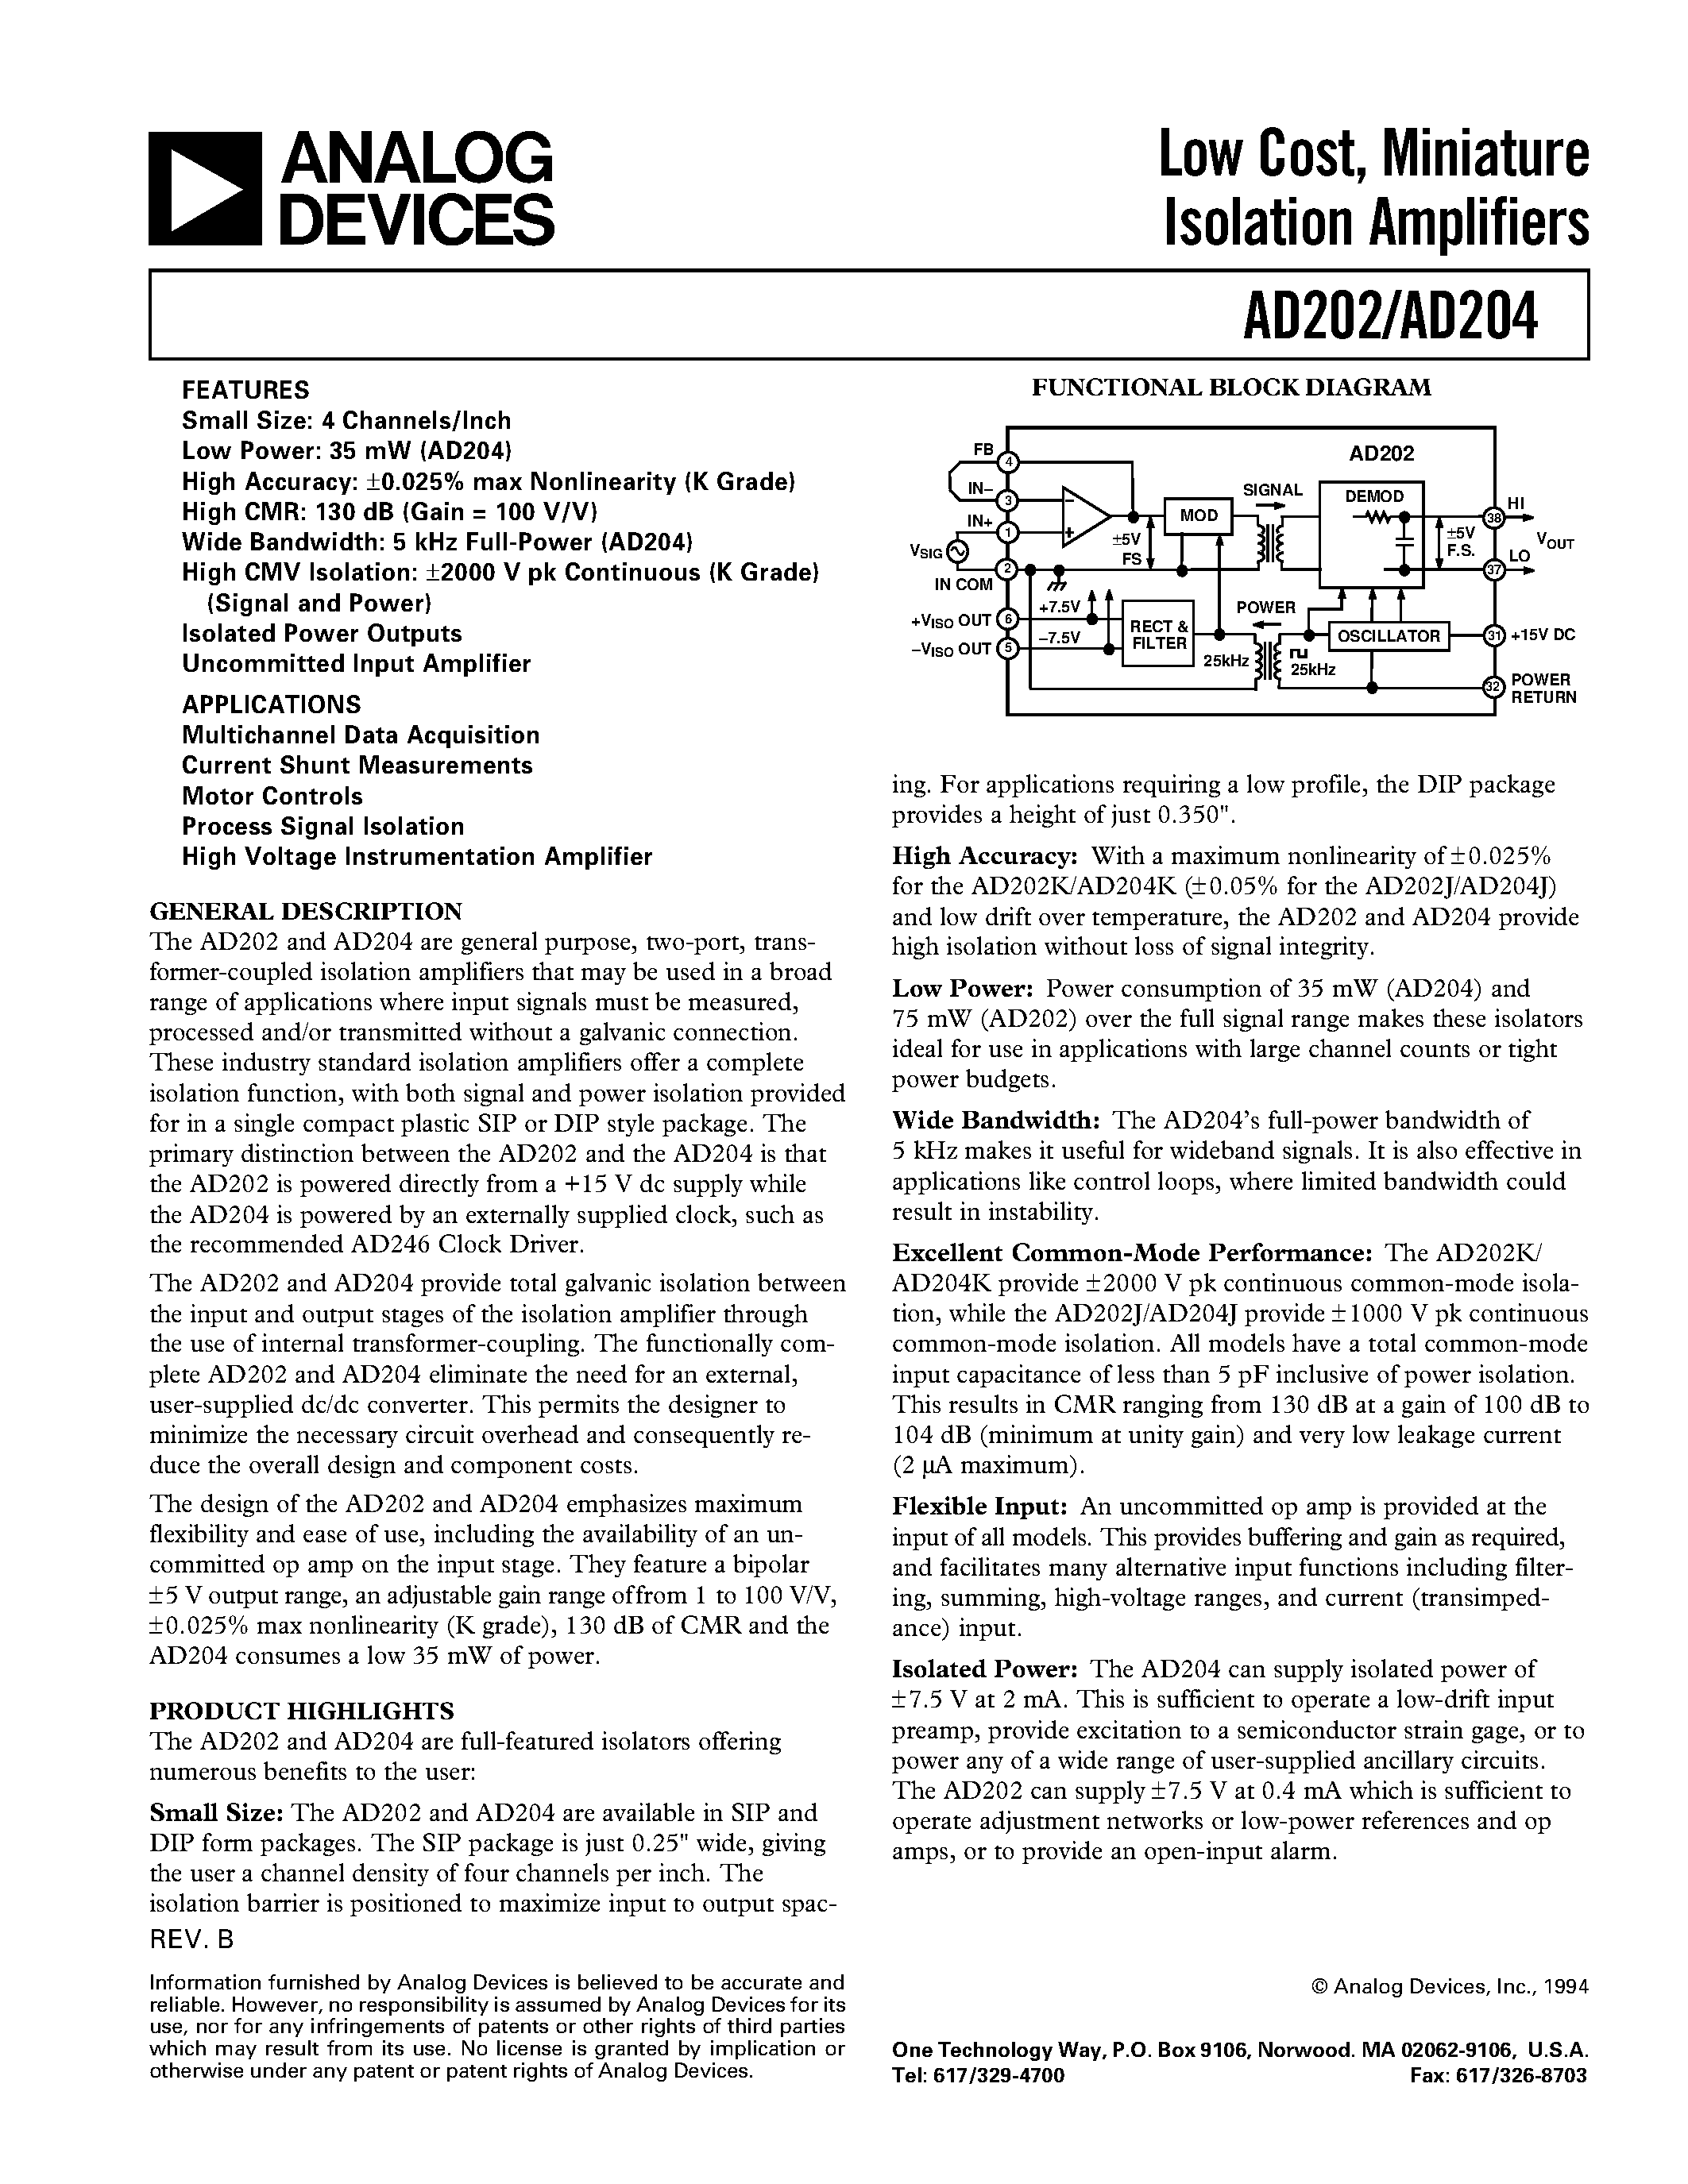 Datasheet AD202J - Low Cost/ Miniature Isolation Amplifiers page 1